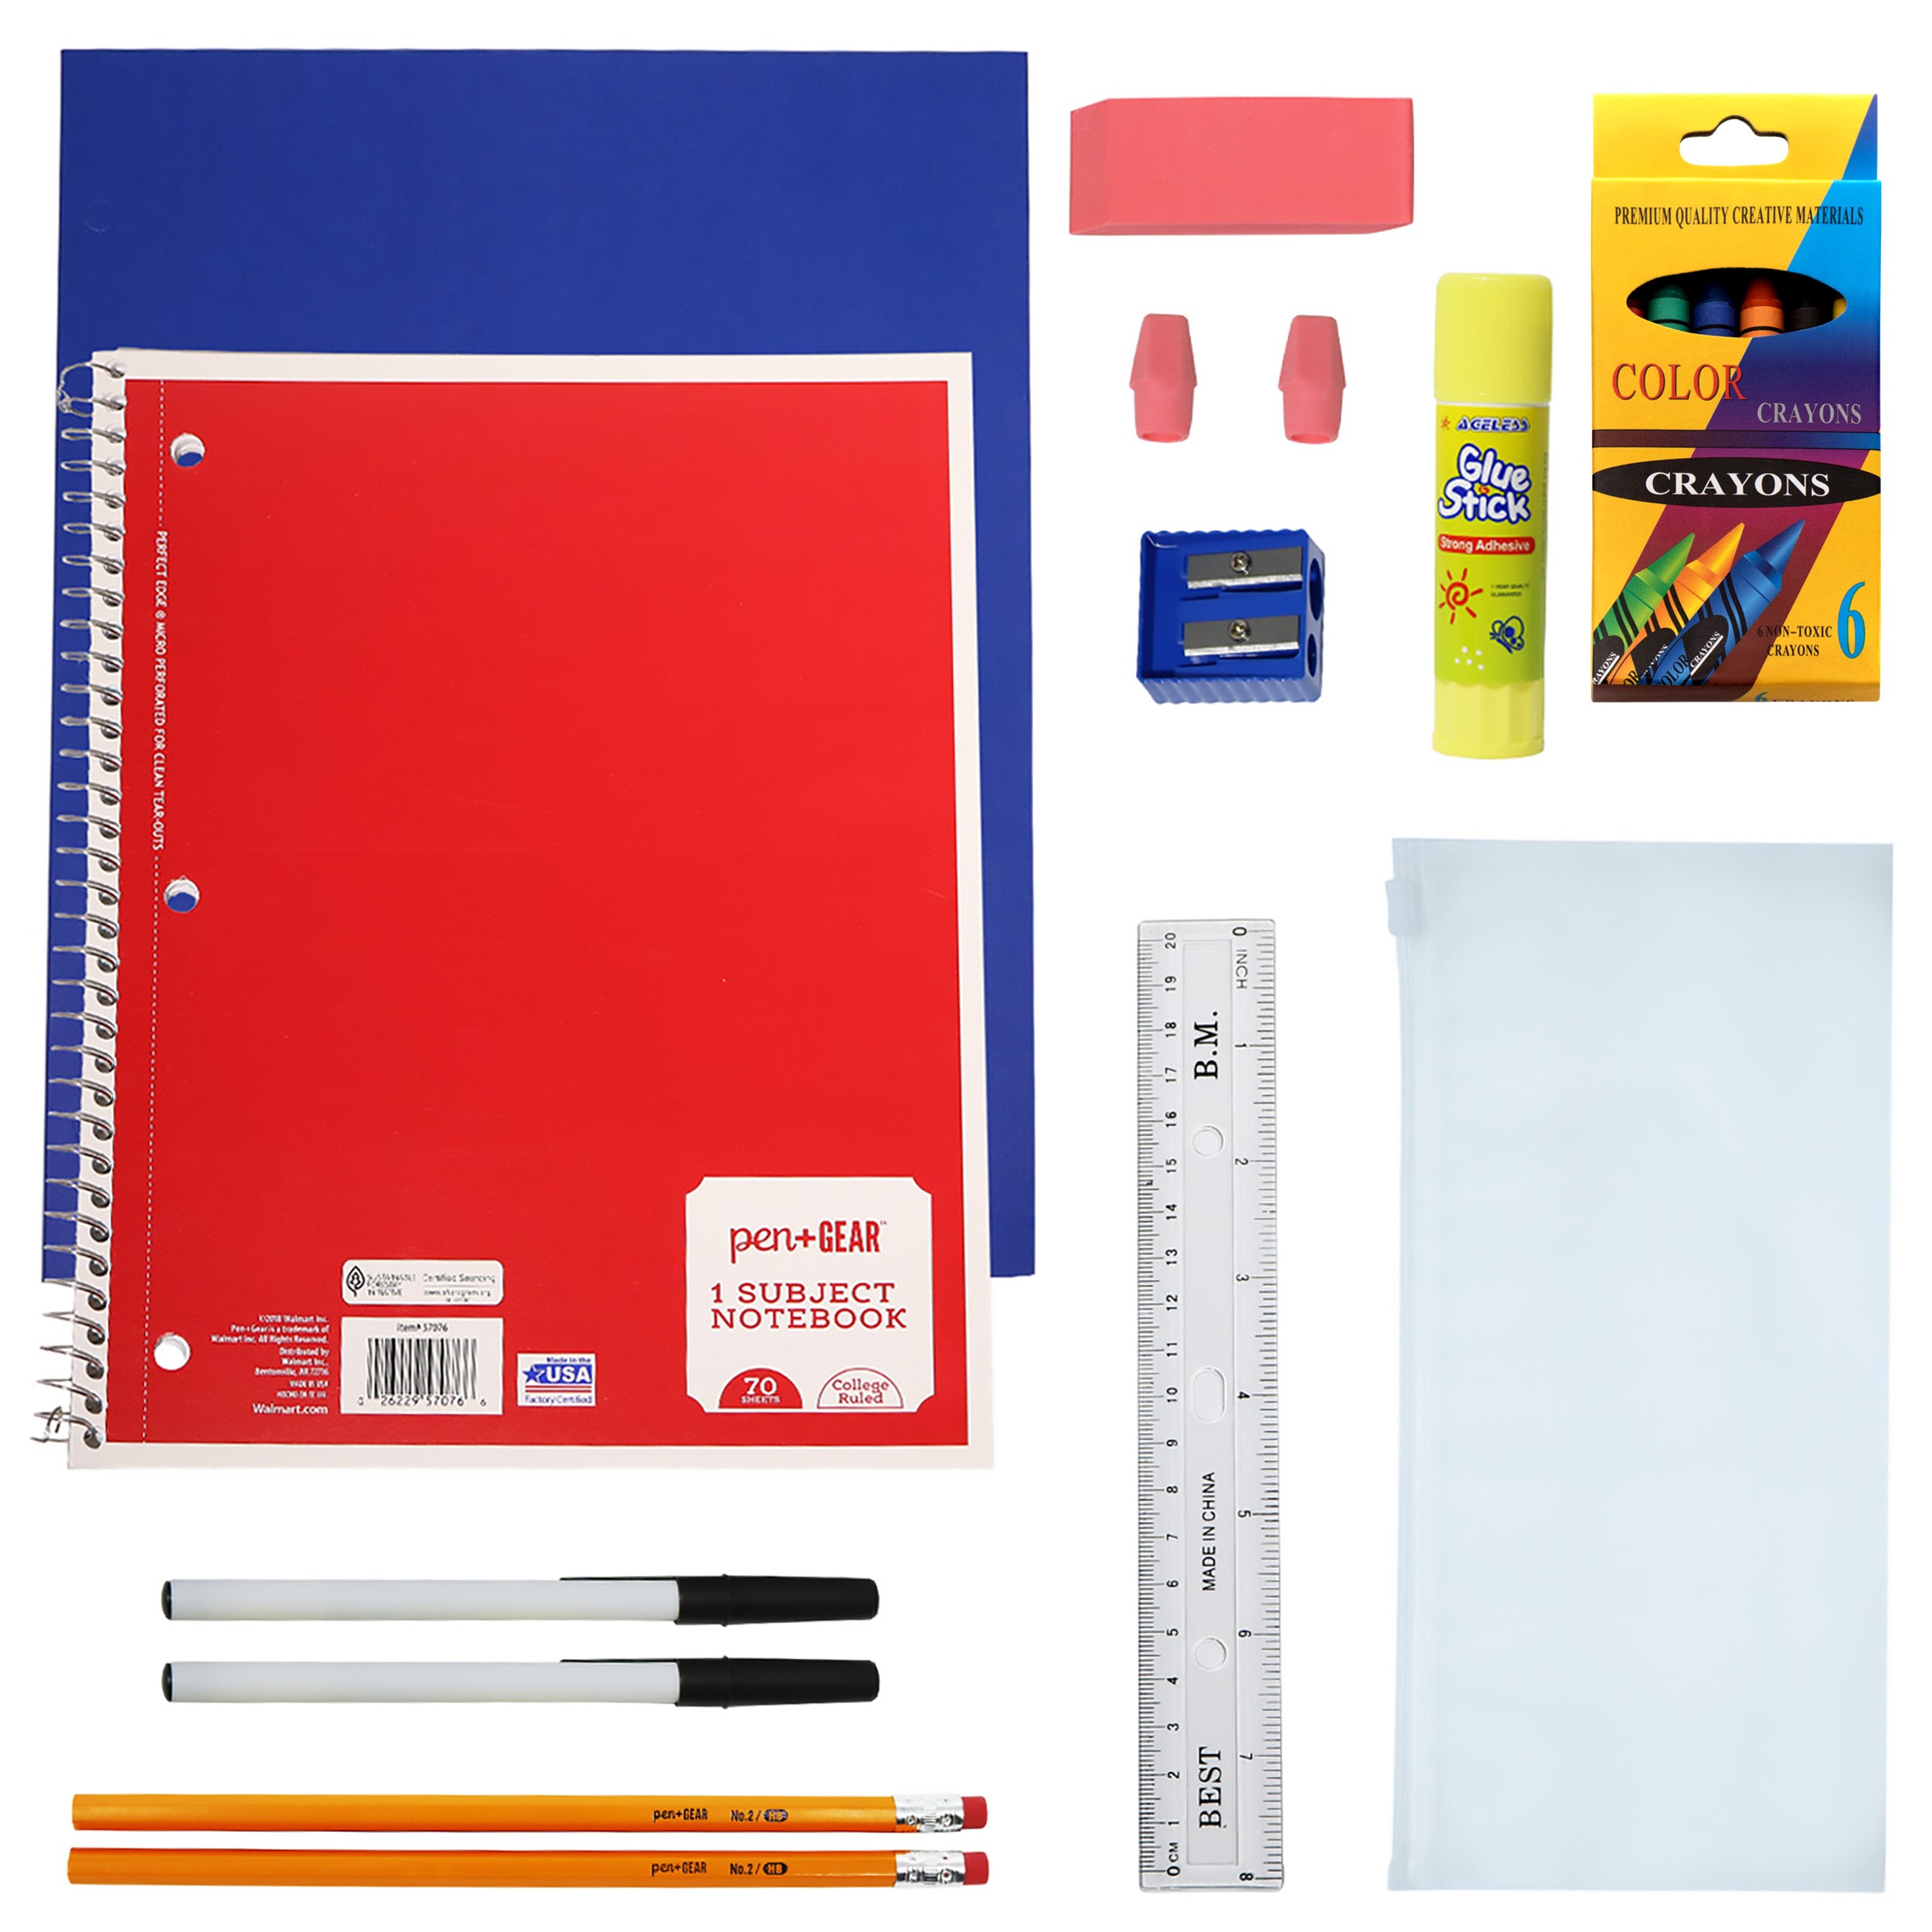 wholesale school supply kits for back to school